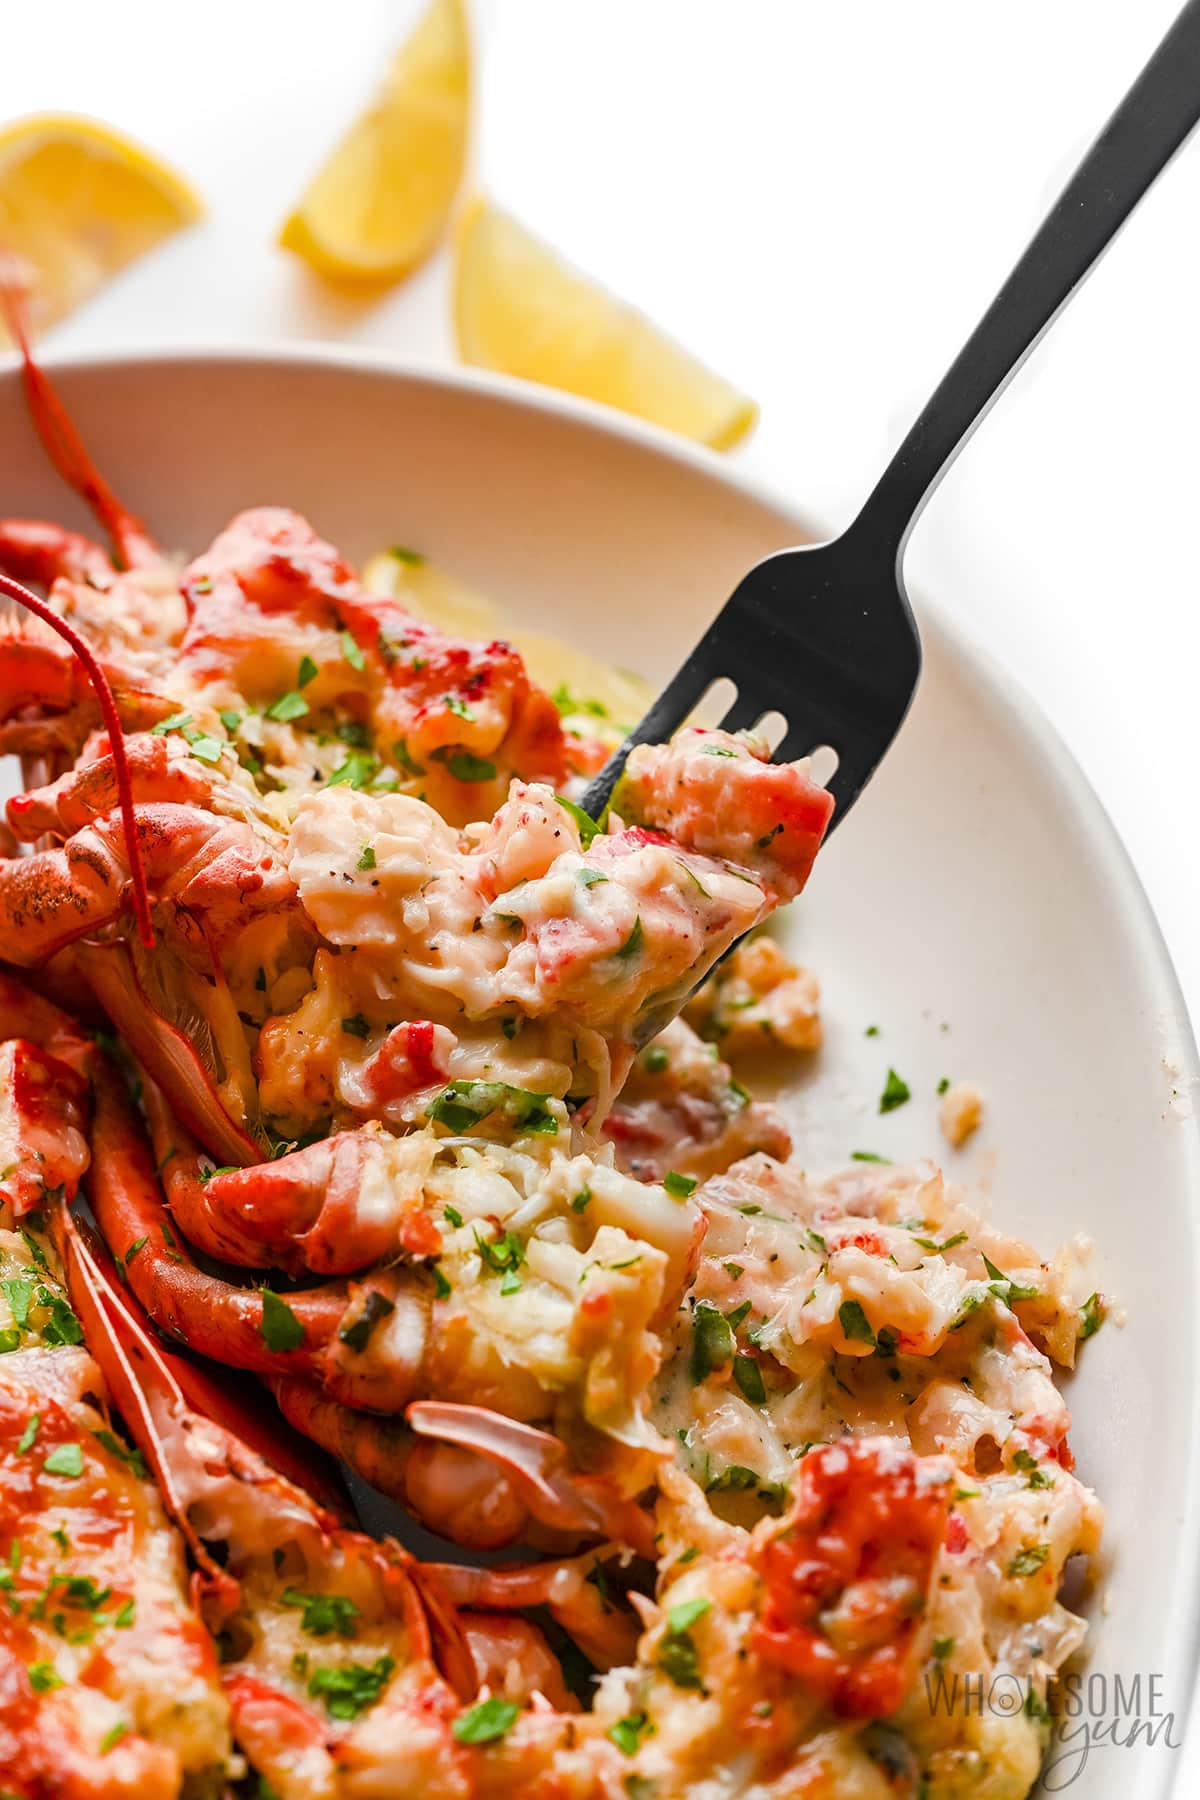 Use a fork to serve the lobster on a plate.